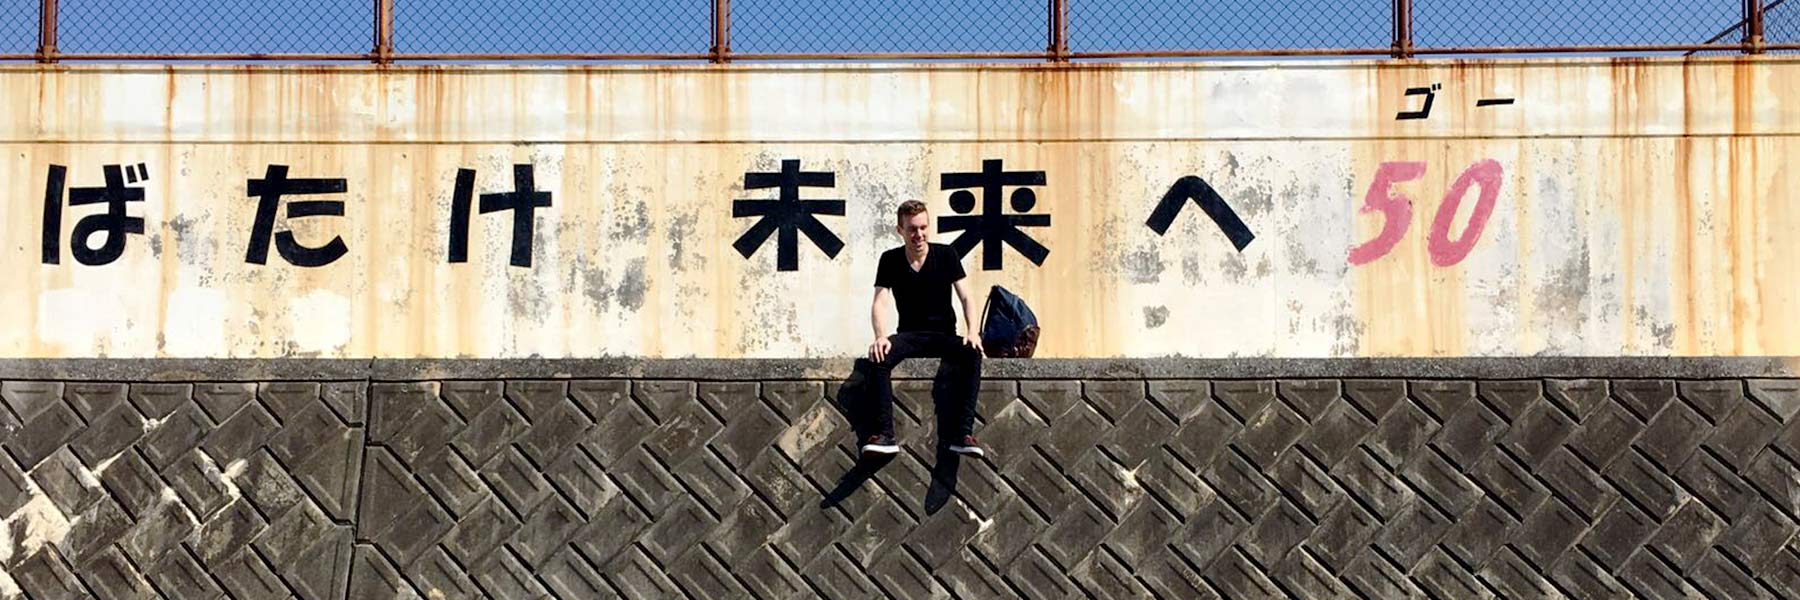 A man dangles his feet over a ledge in front of a wall with Japanese characters on it.